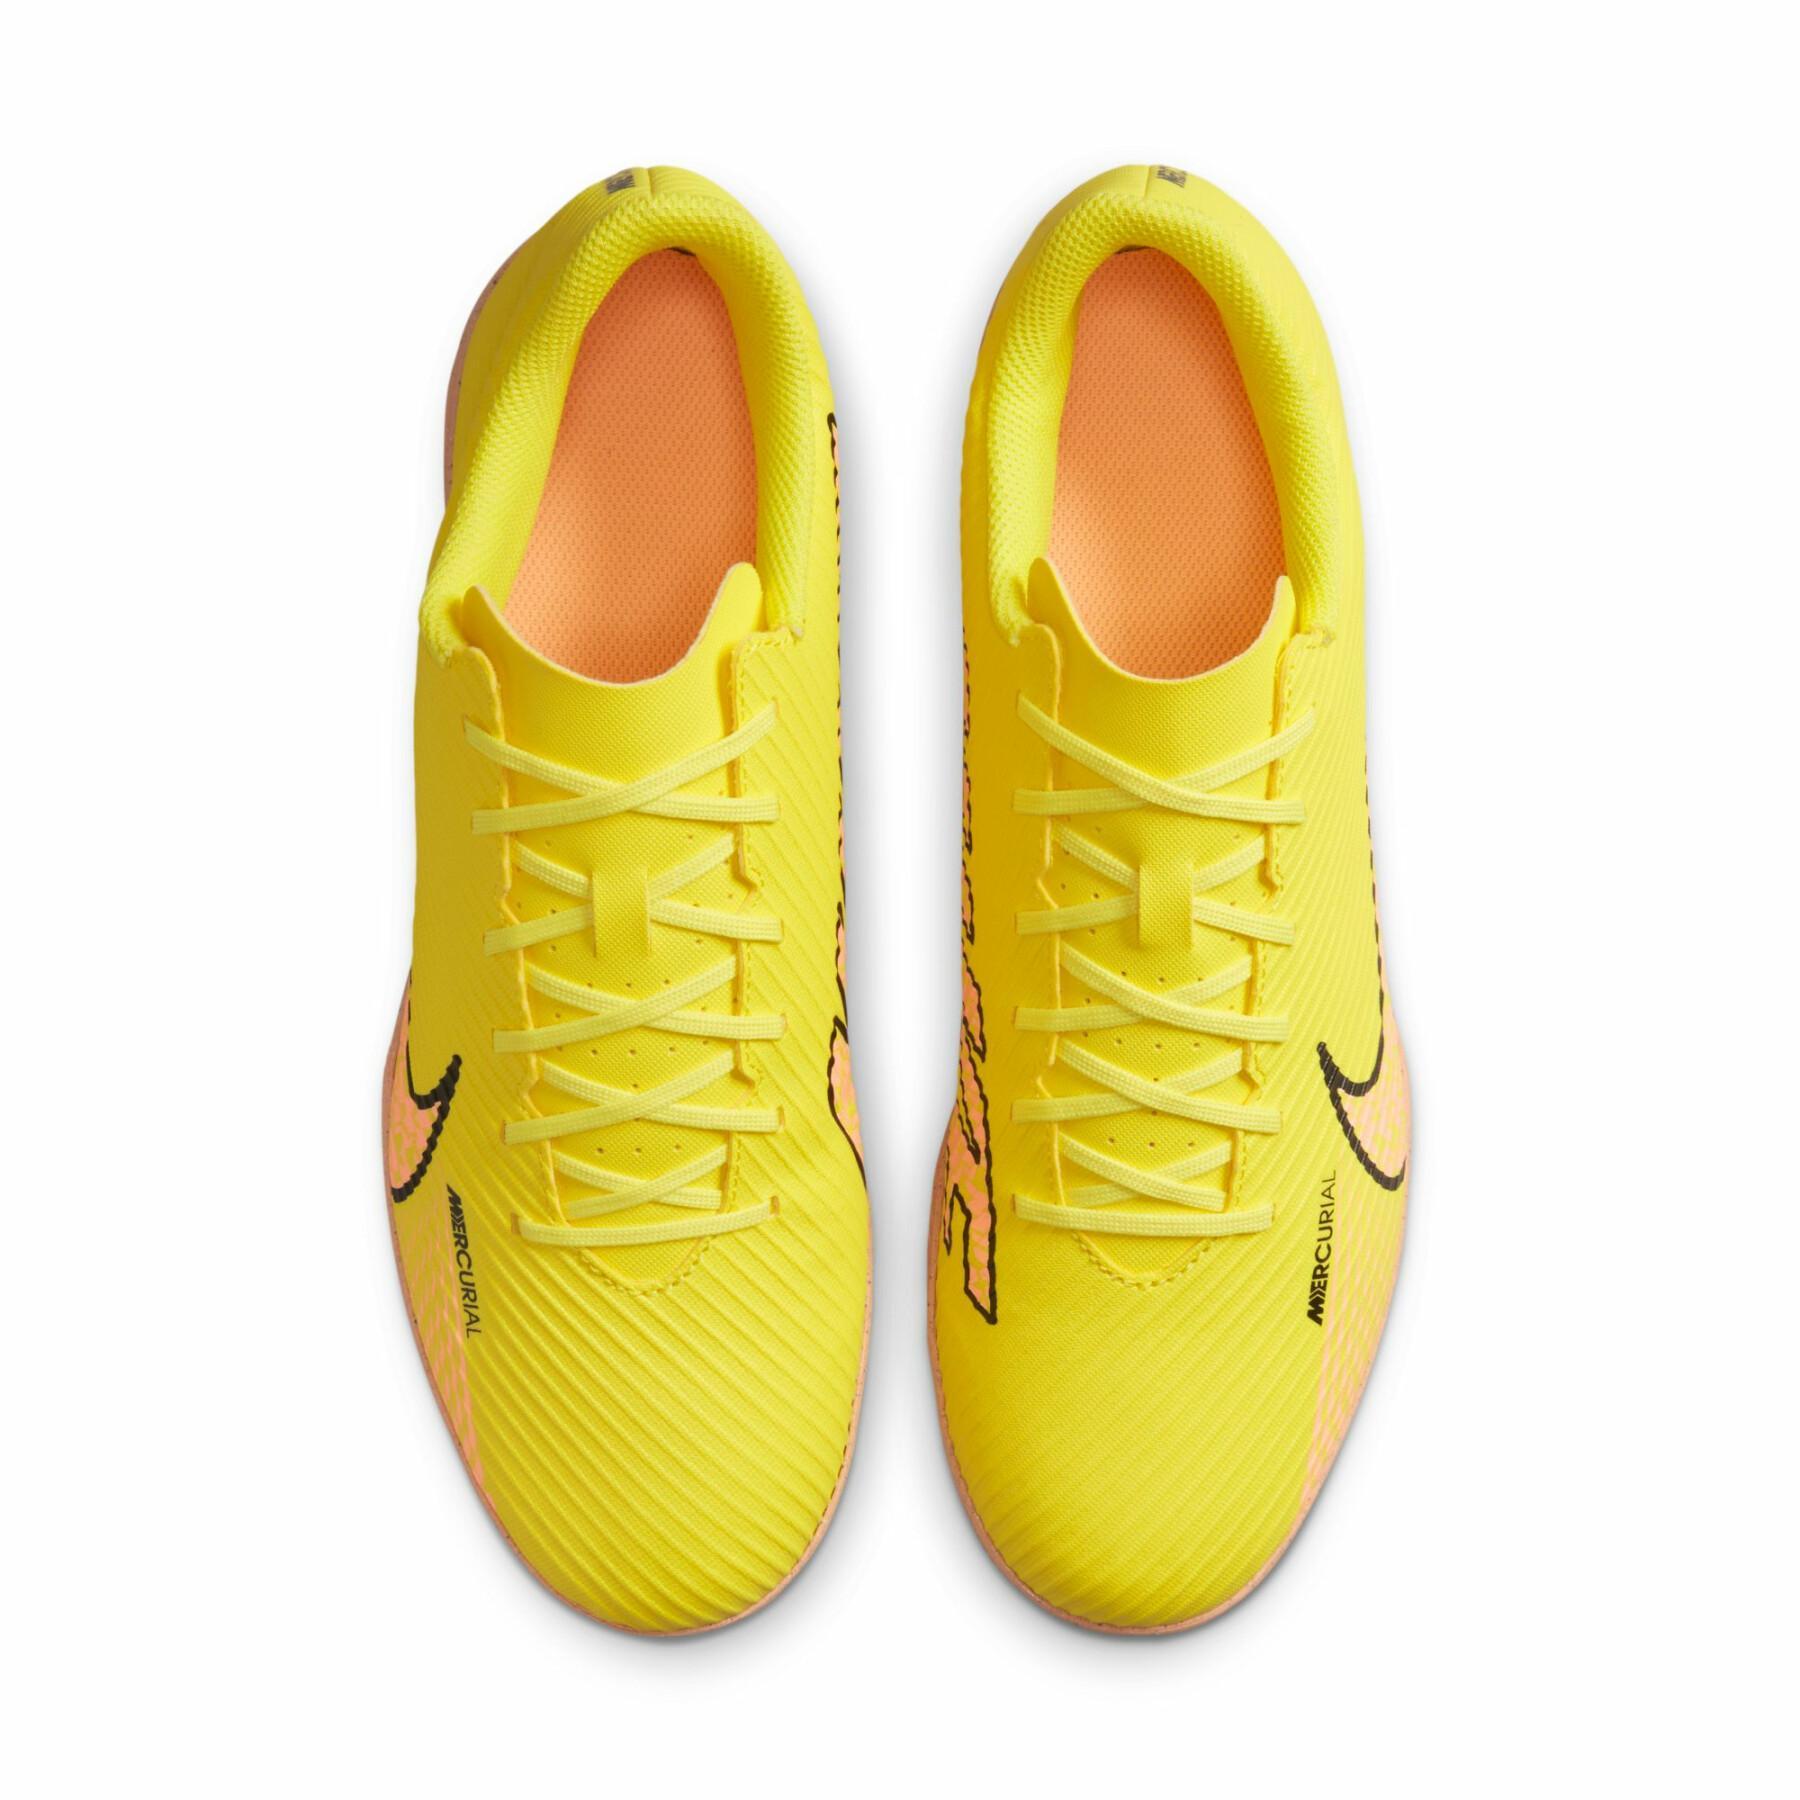 Soccer shoes Nike Mercurial Vapor 15 Club IC - Lucent Pack